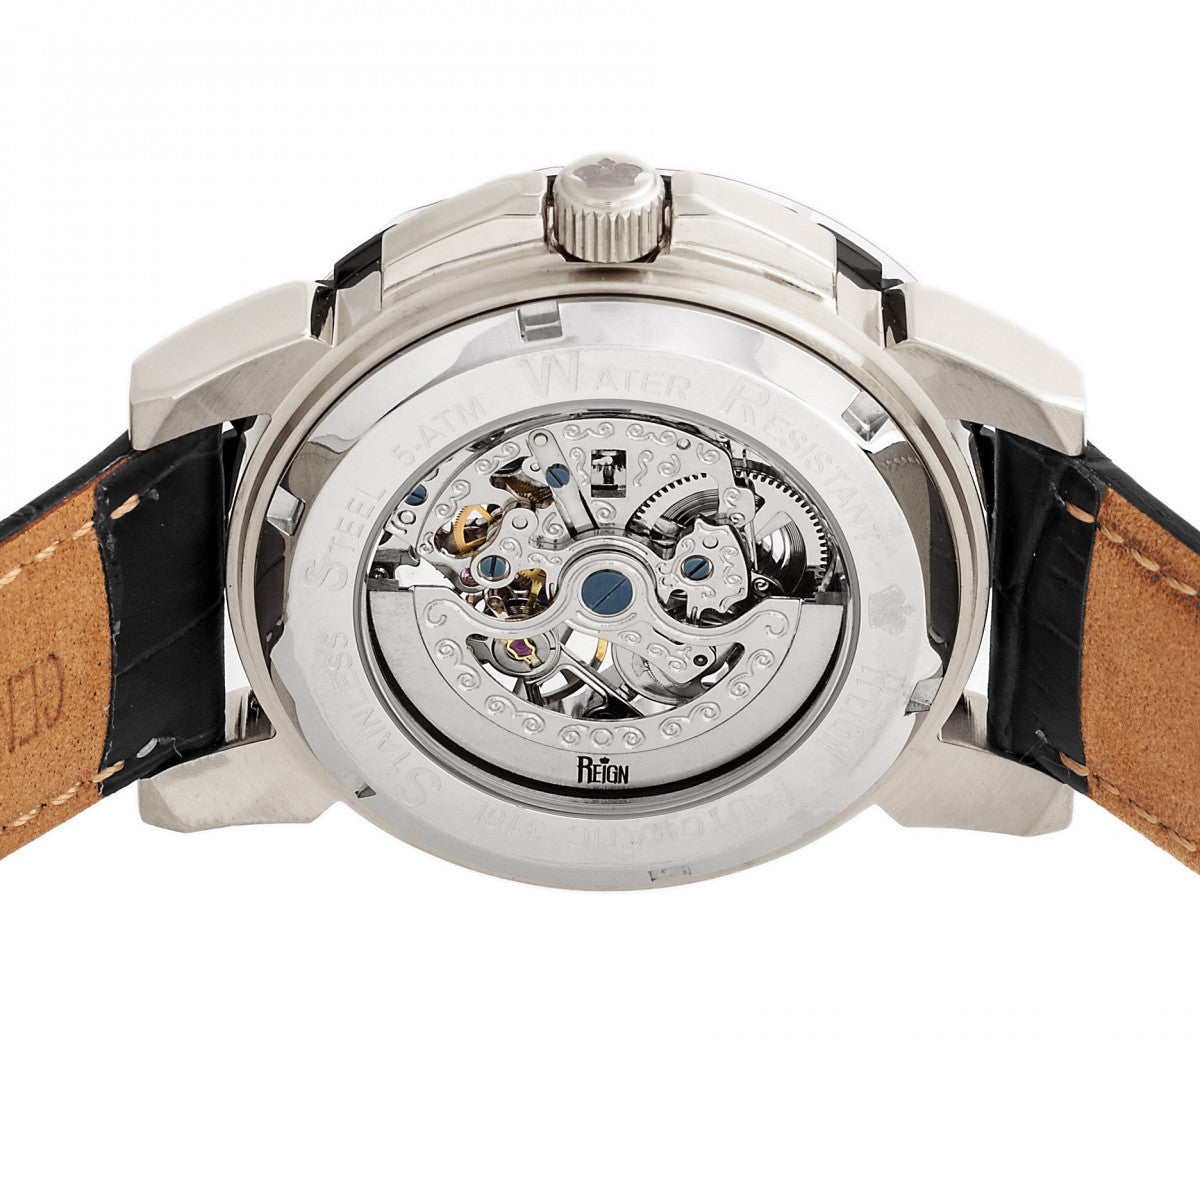 Reign Philippe Automatic Skeleton Leather-Band Watch - Black/White - REIRN4603